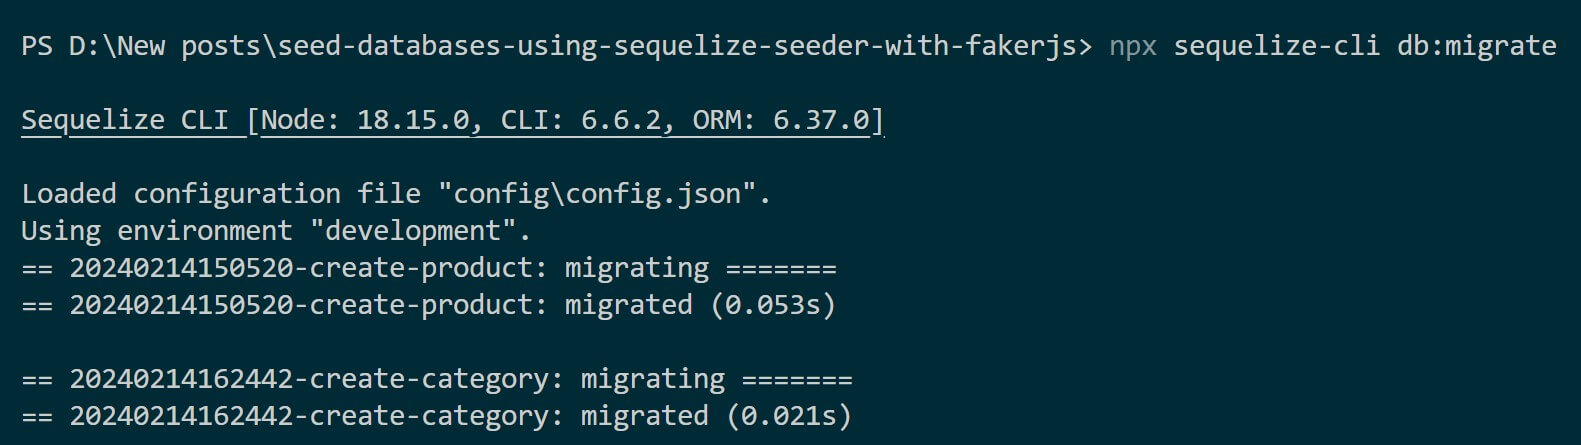 How to Seed Databases Using Sequelize Seeders and Faker.js